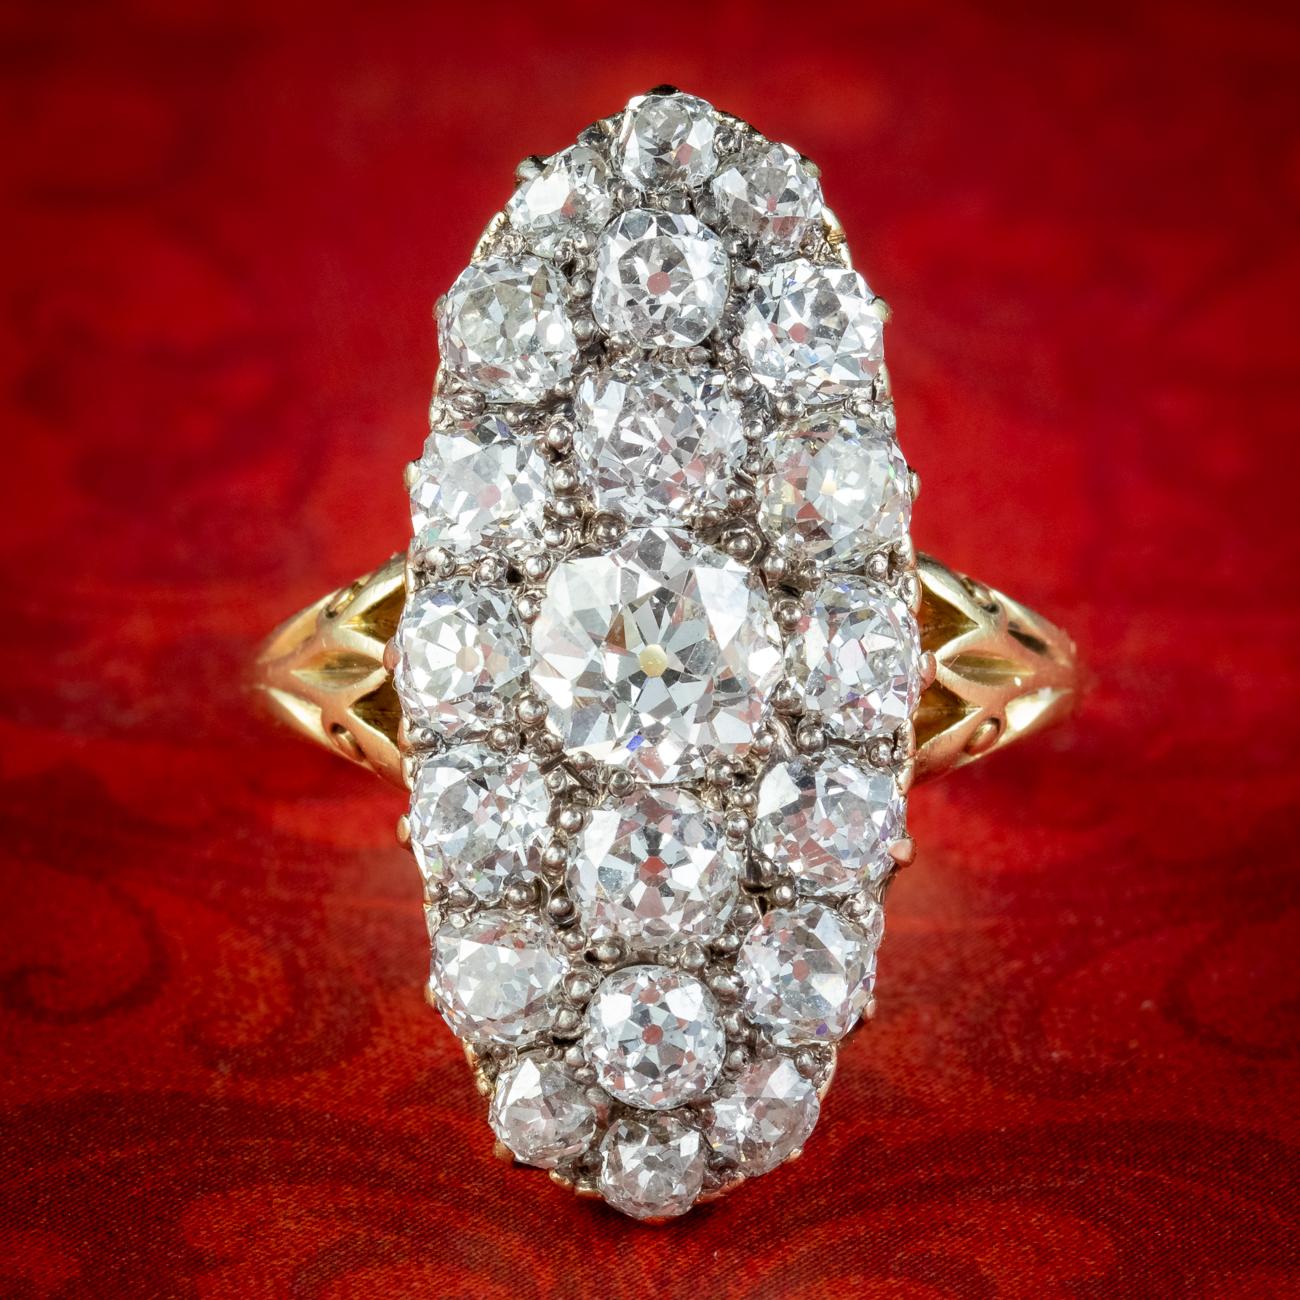 A magnificent antique Victorian cluster ring from the late 1800s encrusted with twenty-one glorious old mine cut diamonds across the elongated navette face.

The diamonds are superbly cut, chunky and dance endlessly in the light, with exceptional